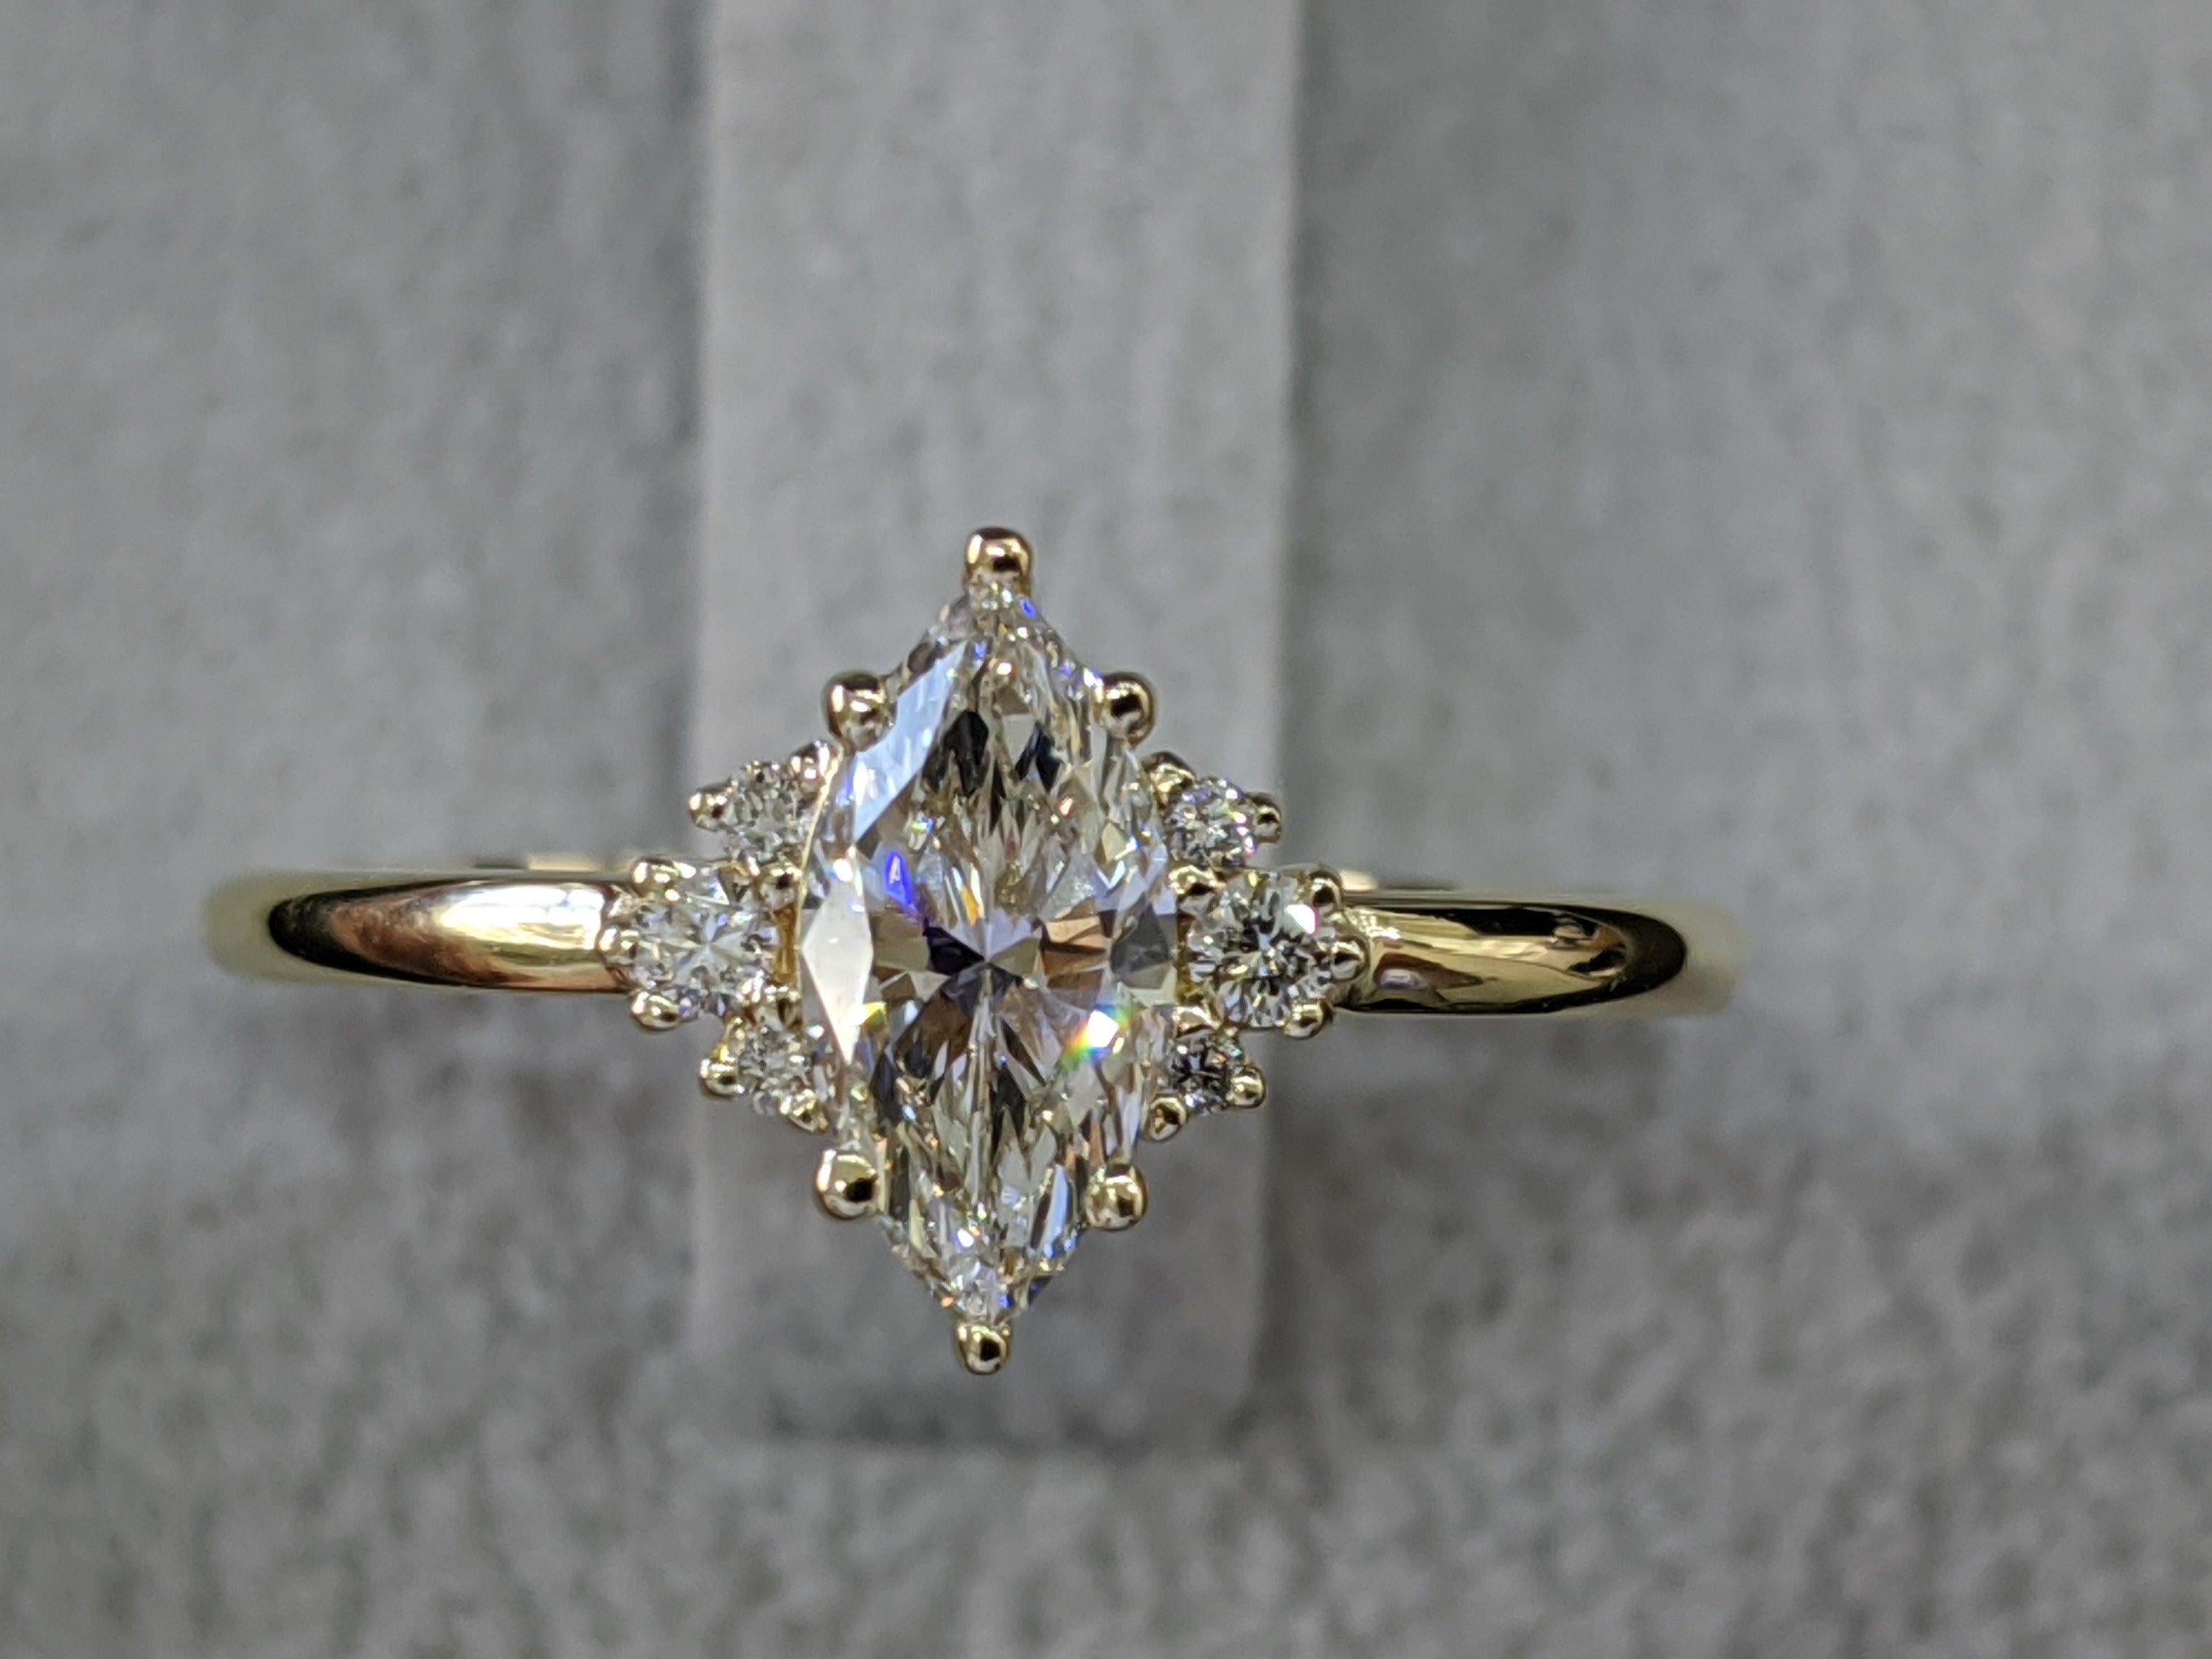 3/4 Carat Marquise Diamond Ring, Marquise Cut Engagement Ring, Marquise Engagement Ring, Victorian Engagement Ring, Victorian Diamond Ring
 
 Main Stone Name: Natural Earth Mined Diamond 
 Main Stone Weight: 0.70 ct.
 Main Stone Clarity: SI1
 Main